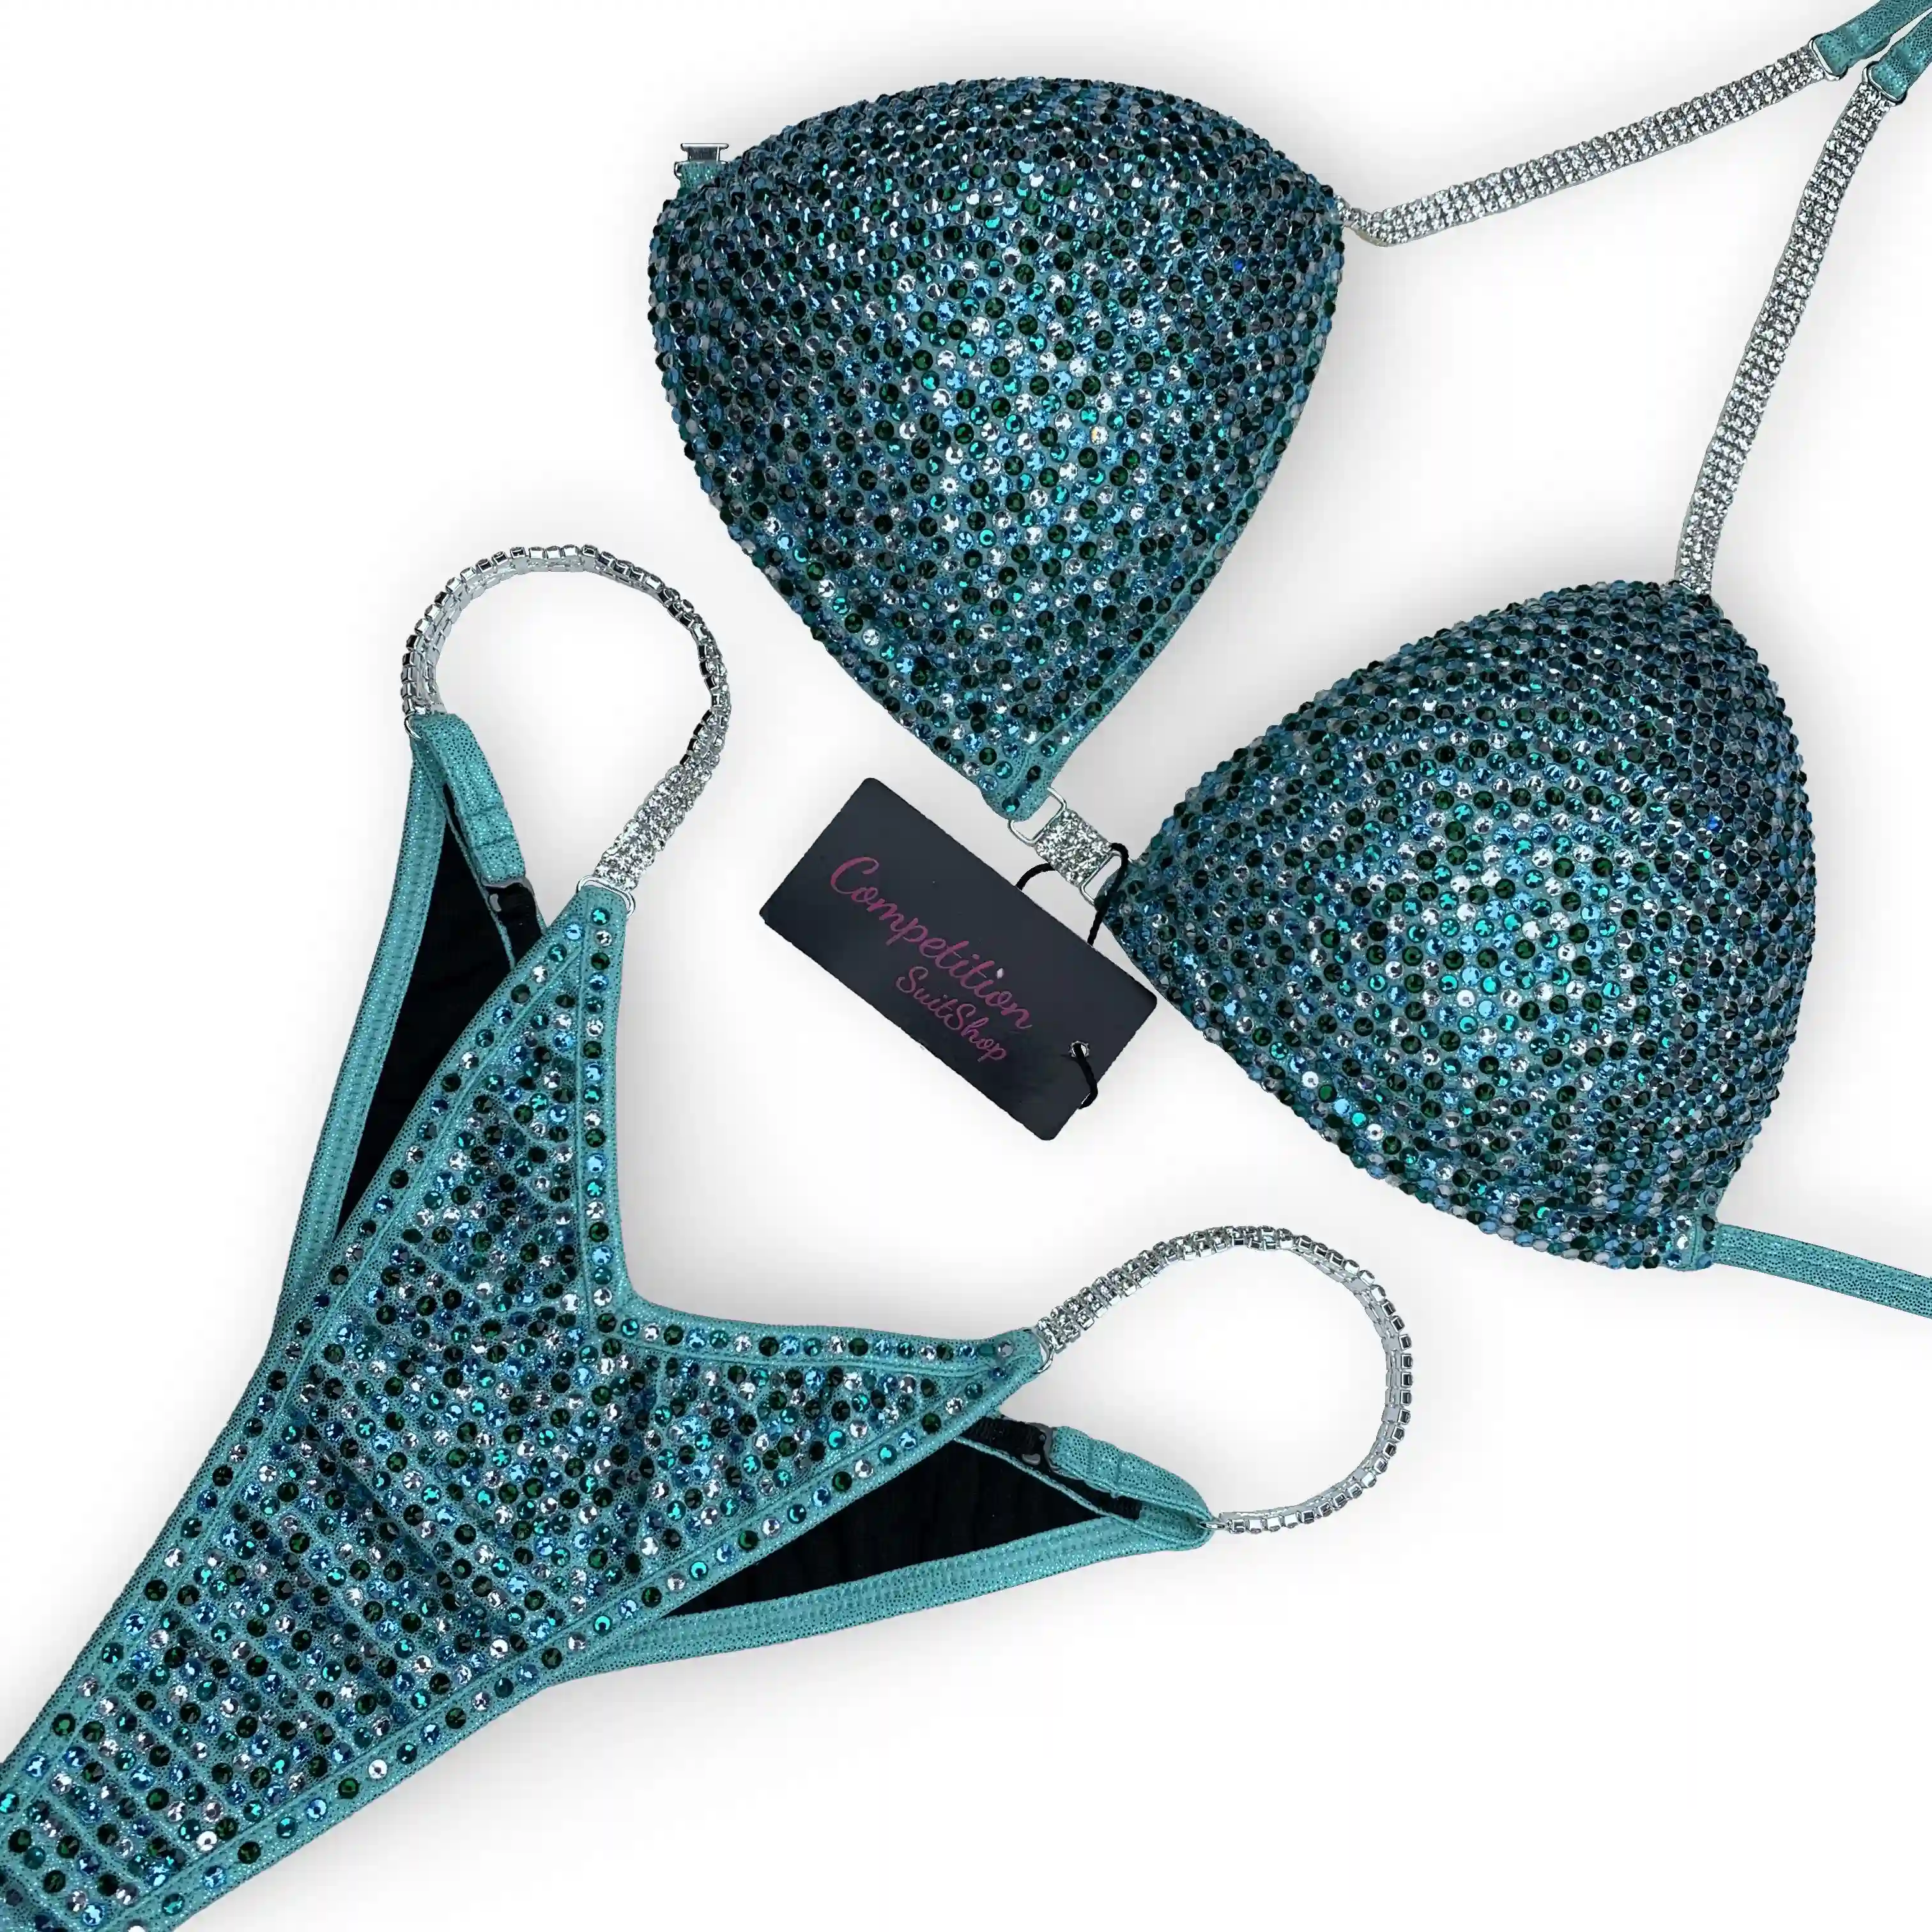 Aqua Scatter with Teal & Green Highlights Bikini Competition Suit B193 